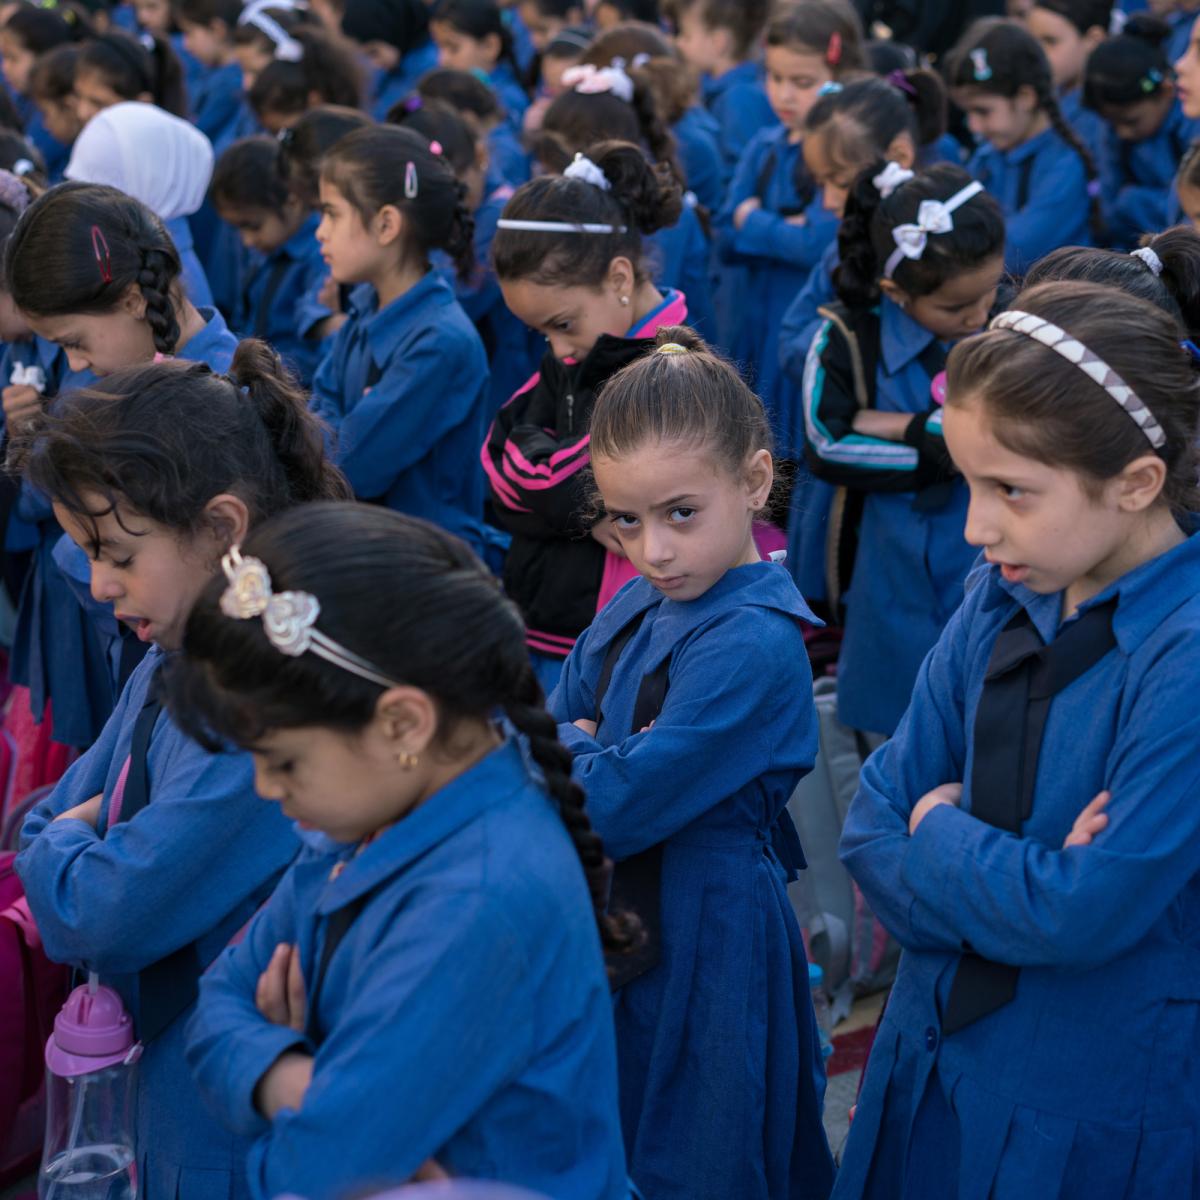 A girls looks up among a crowd of girls with their heads bowed.